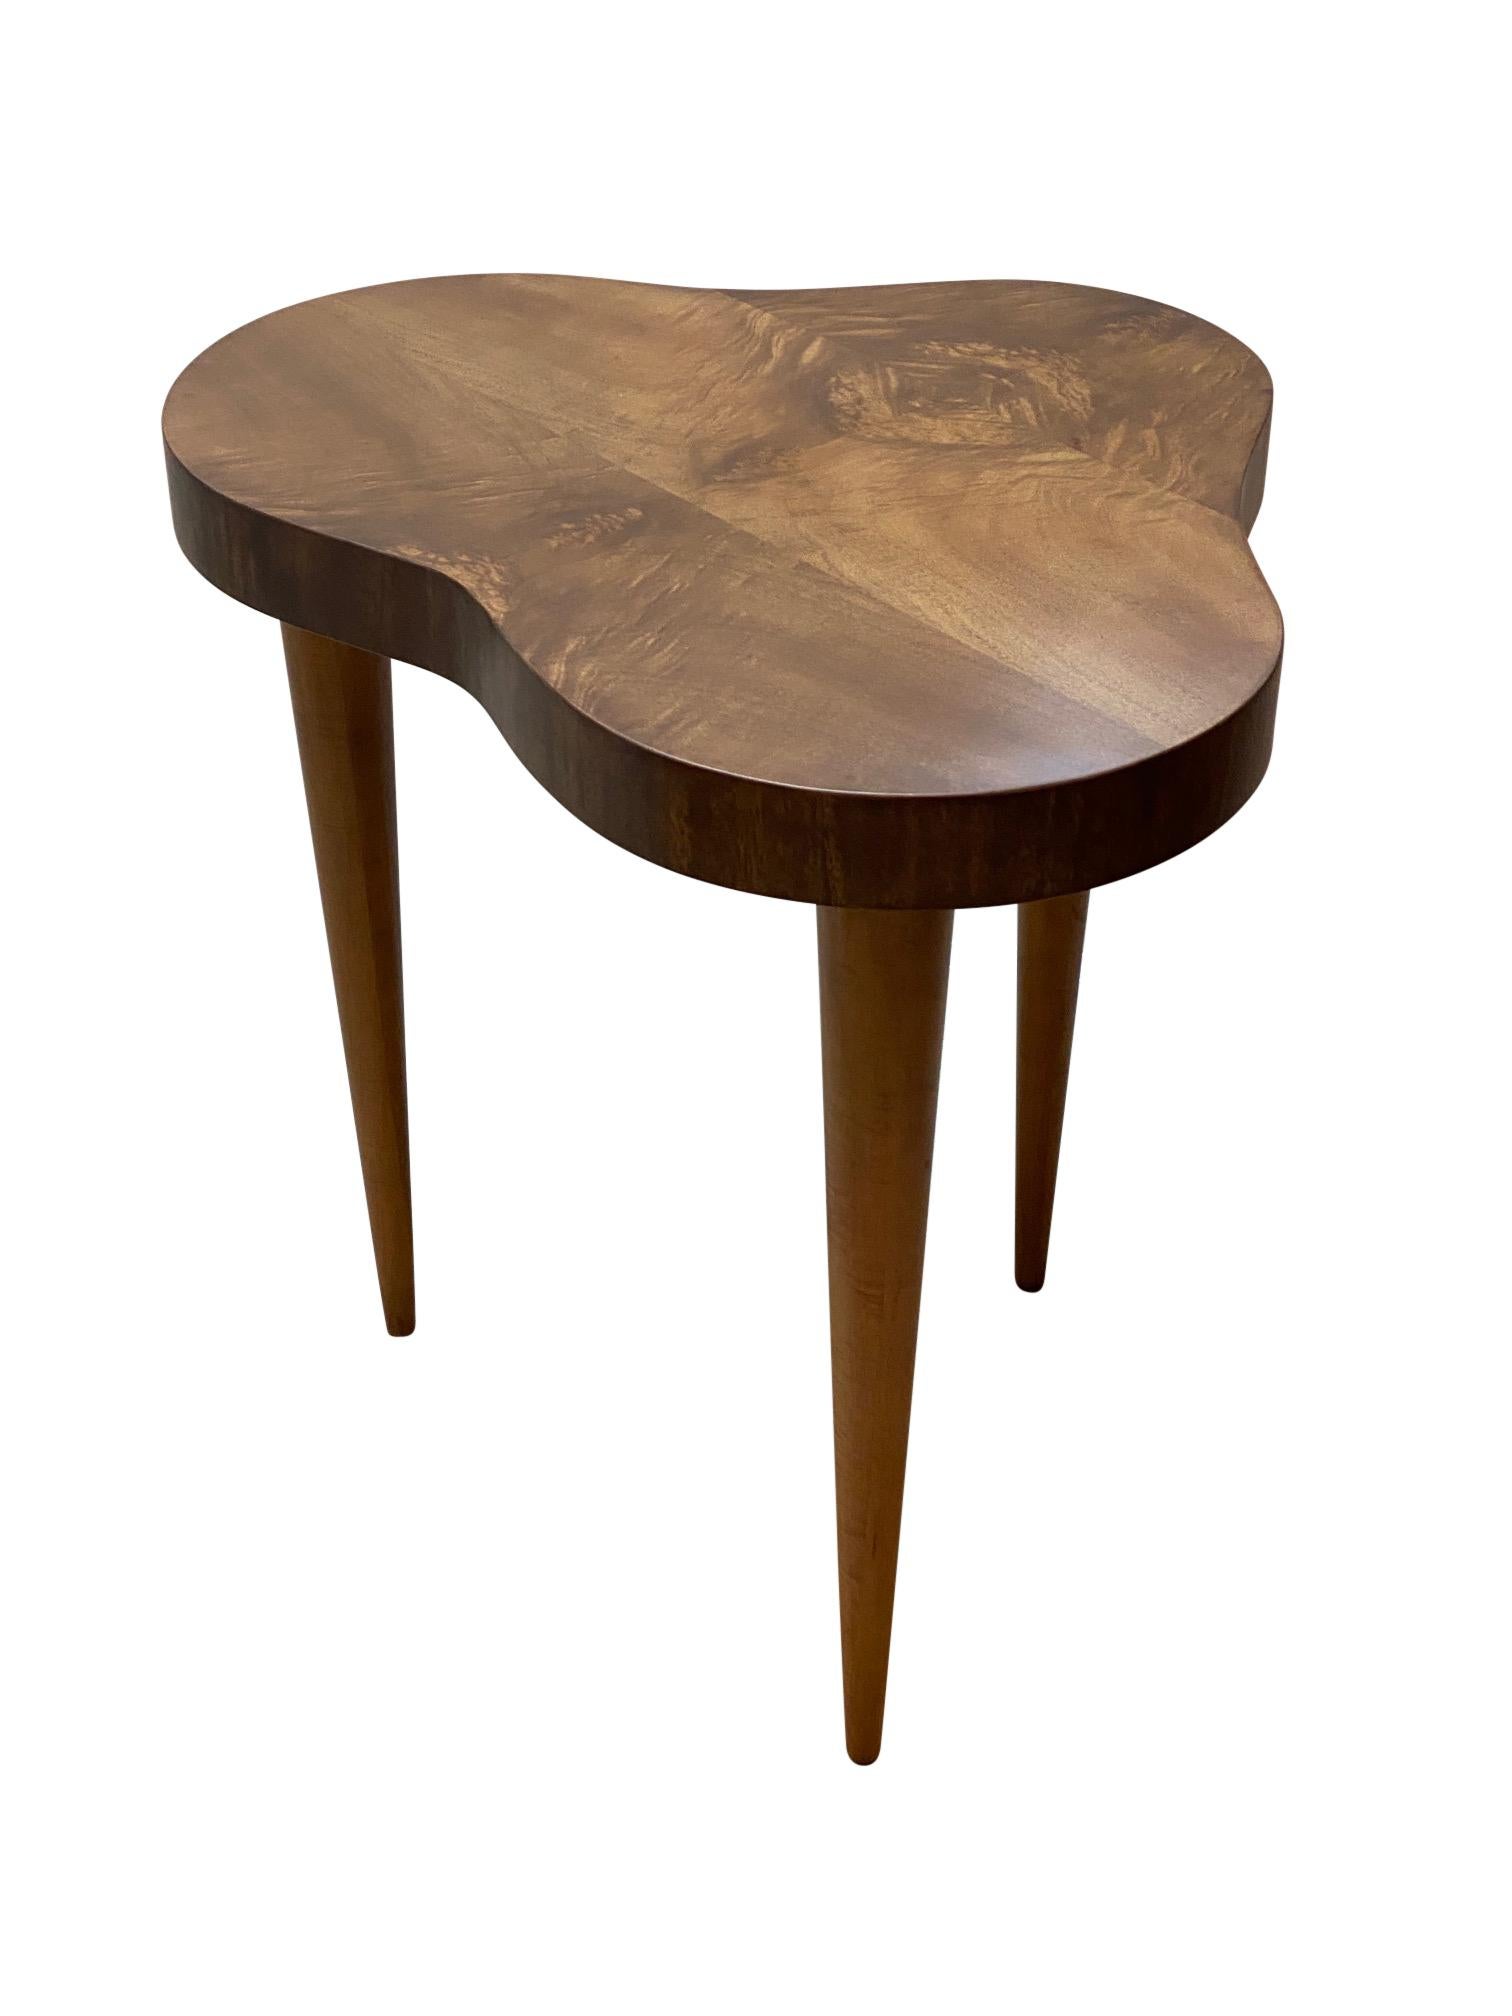 Gilbert Rohde Cloud side table, organic shape, wood side table produced by Herman Miller. 
 Made in the 1940s. Modern.